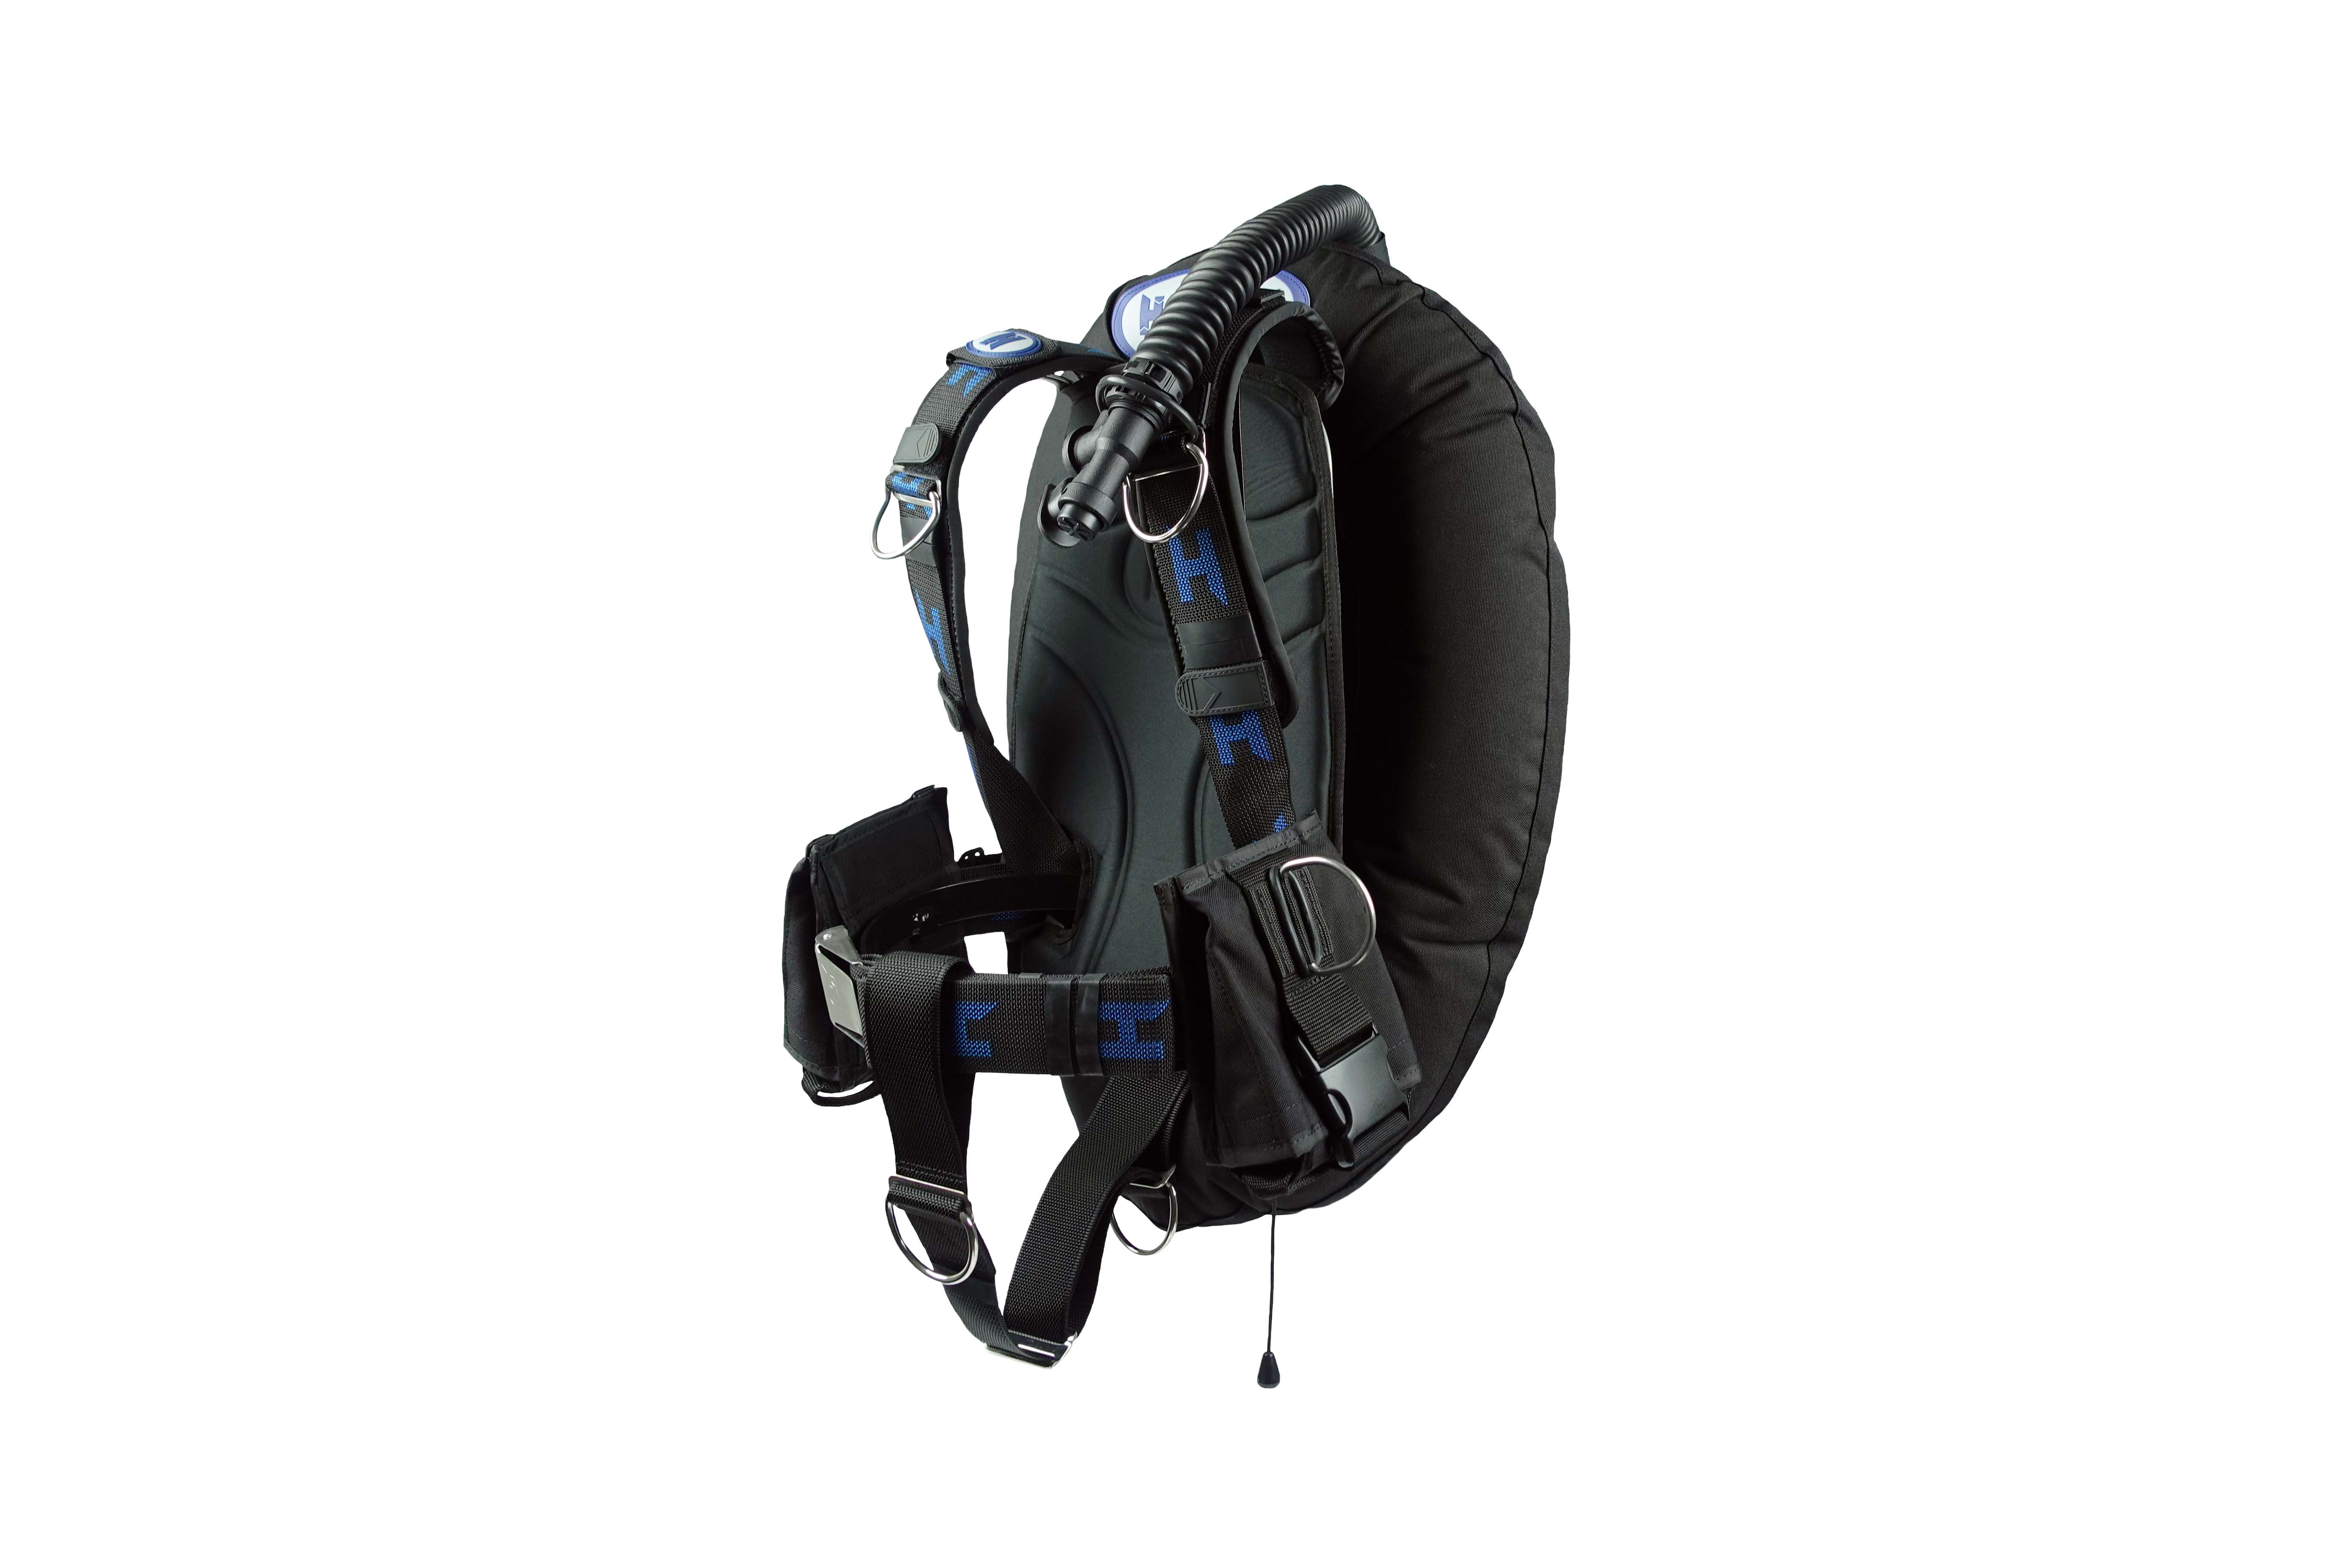 scuba diving halcyon infinity bcd system left view